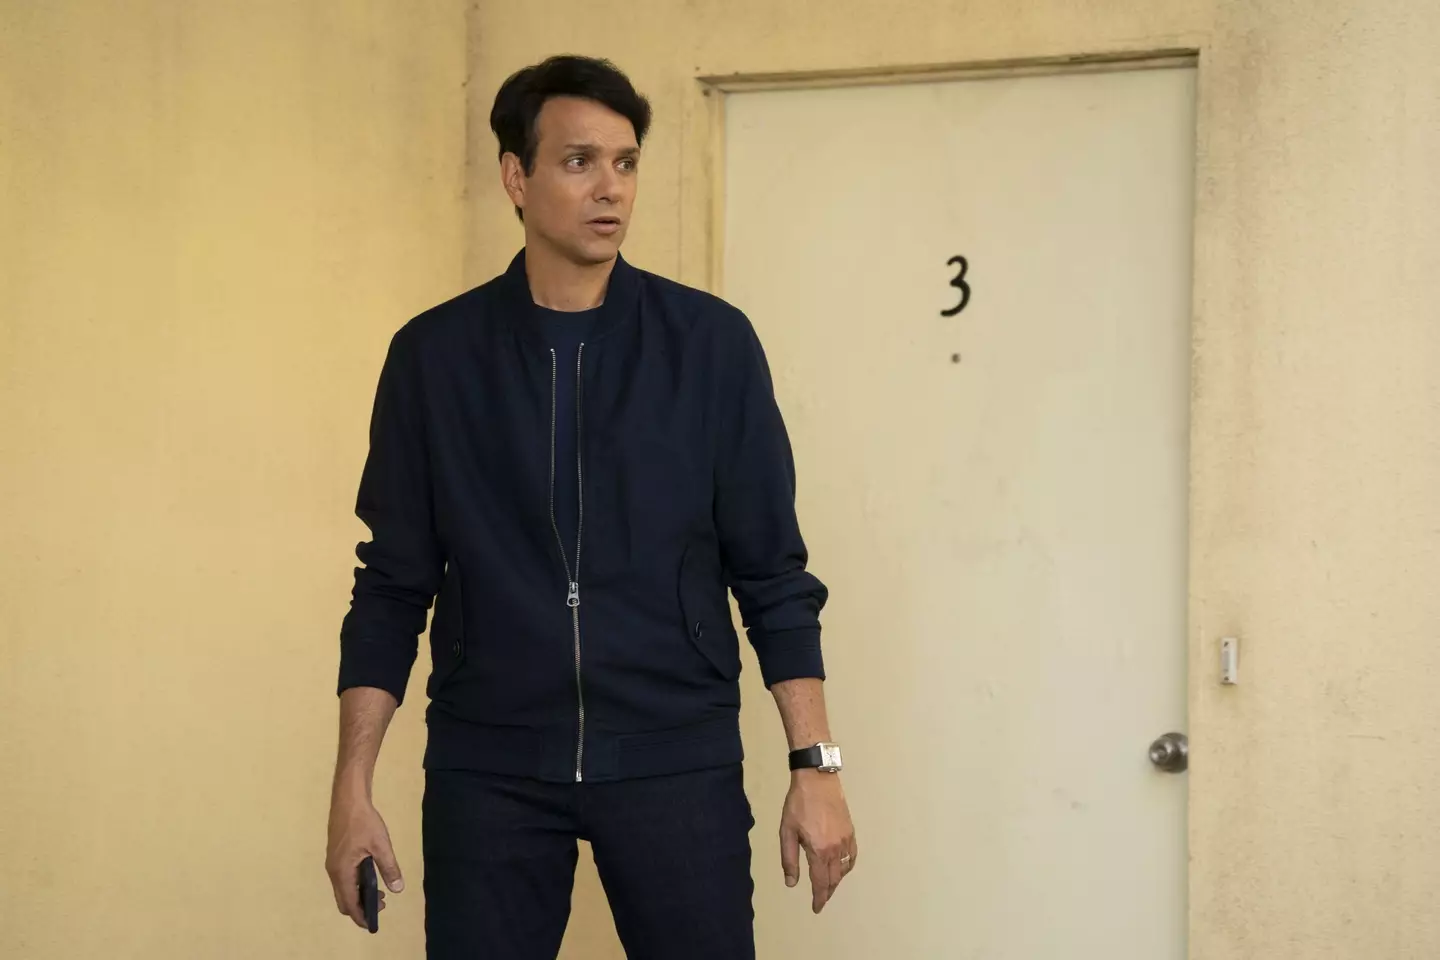 Ralph Macchio now appears in Cobra Kai for Netflix.